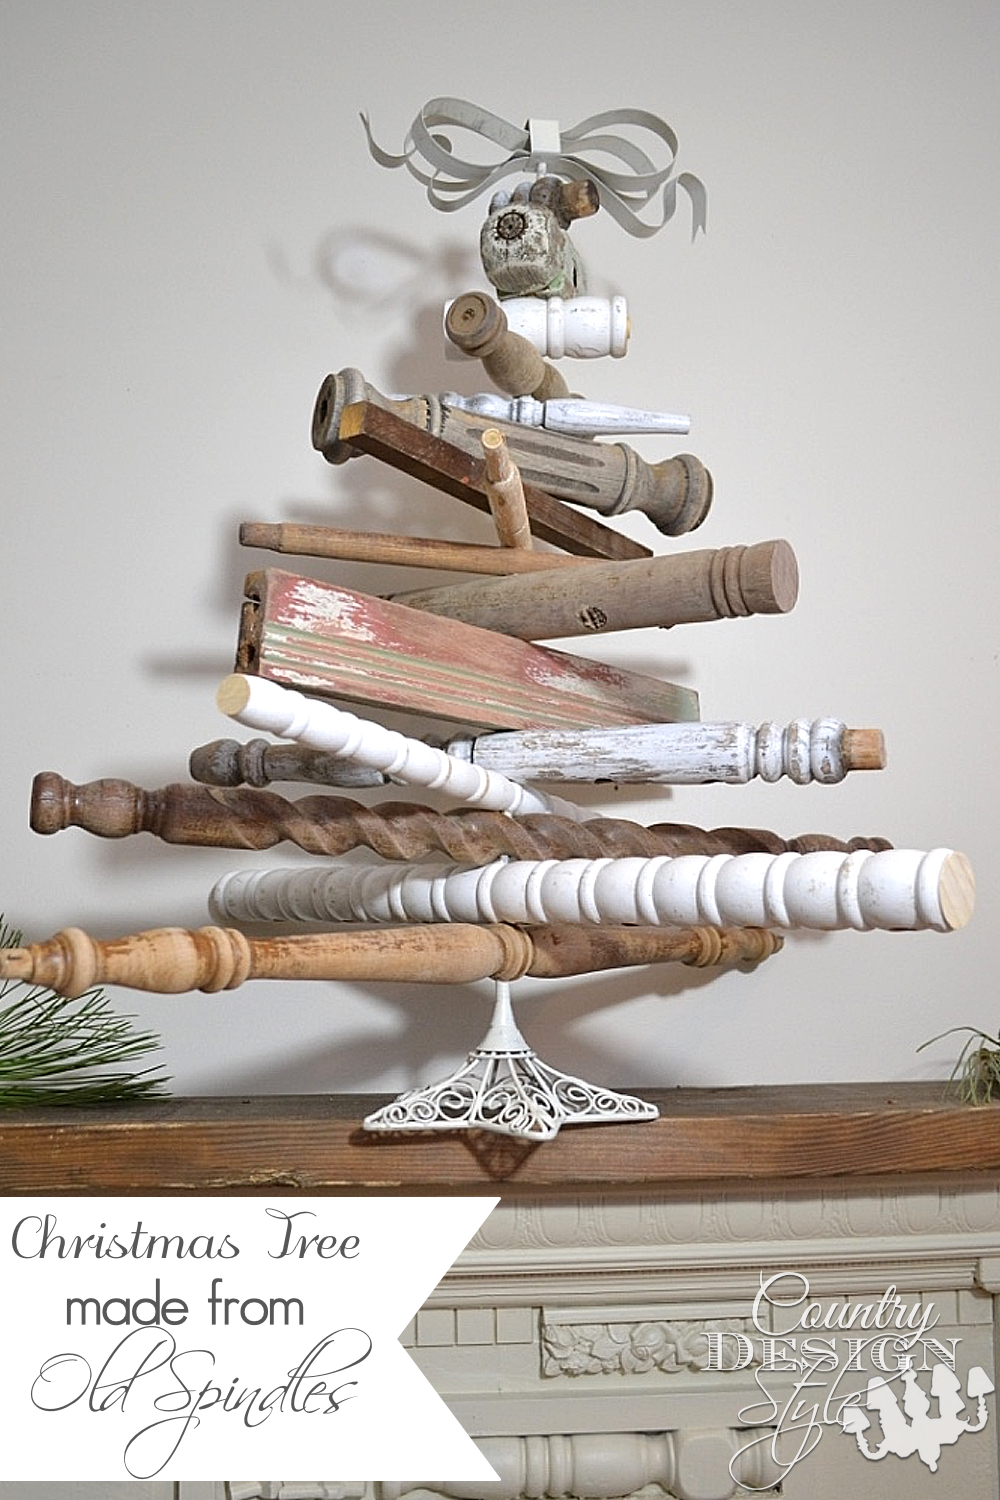 Vintage style Christmas tree made from old spindles turned in many directions | countrydesignstyle.com